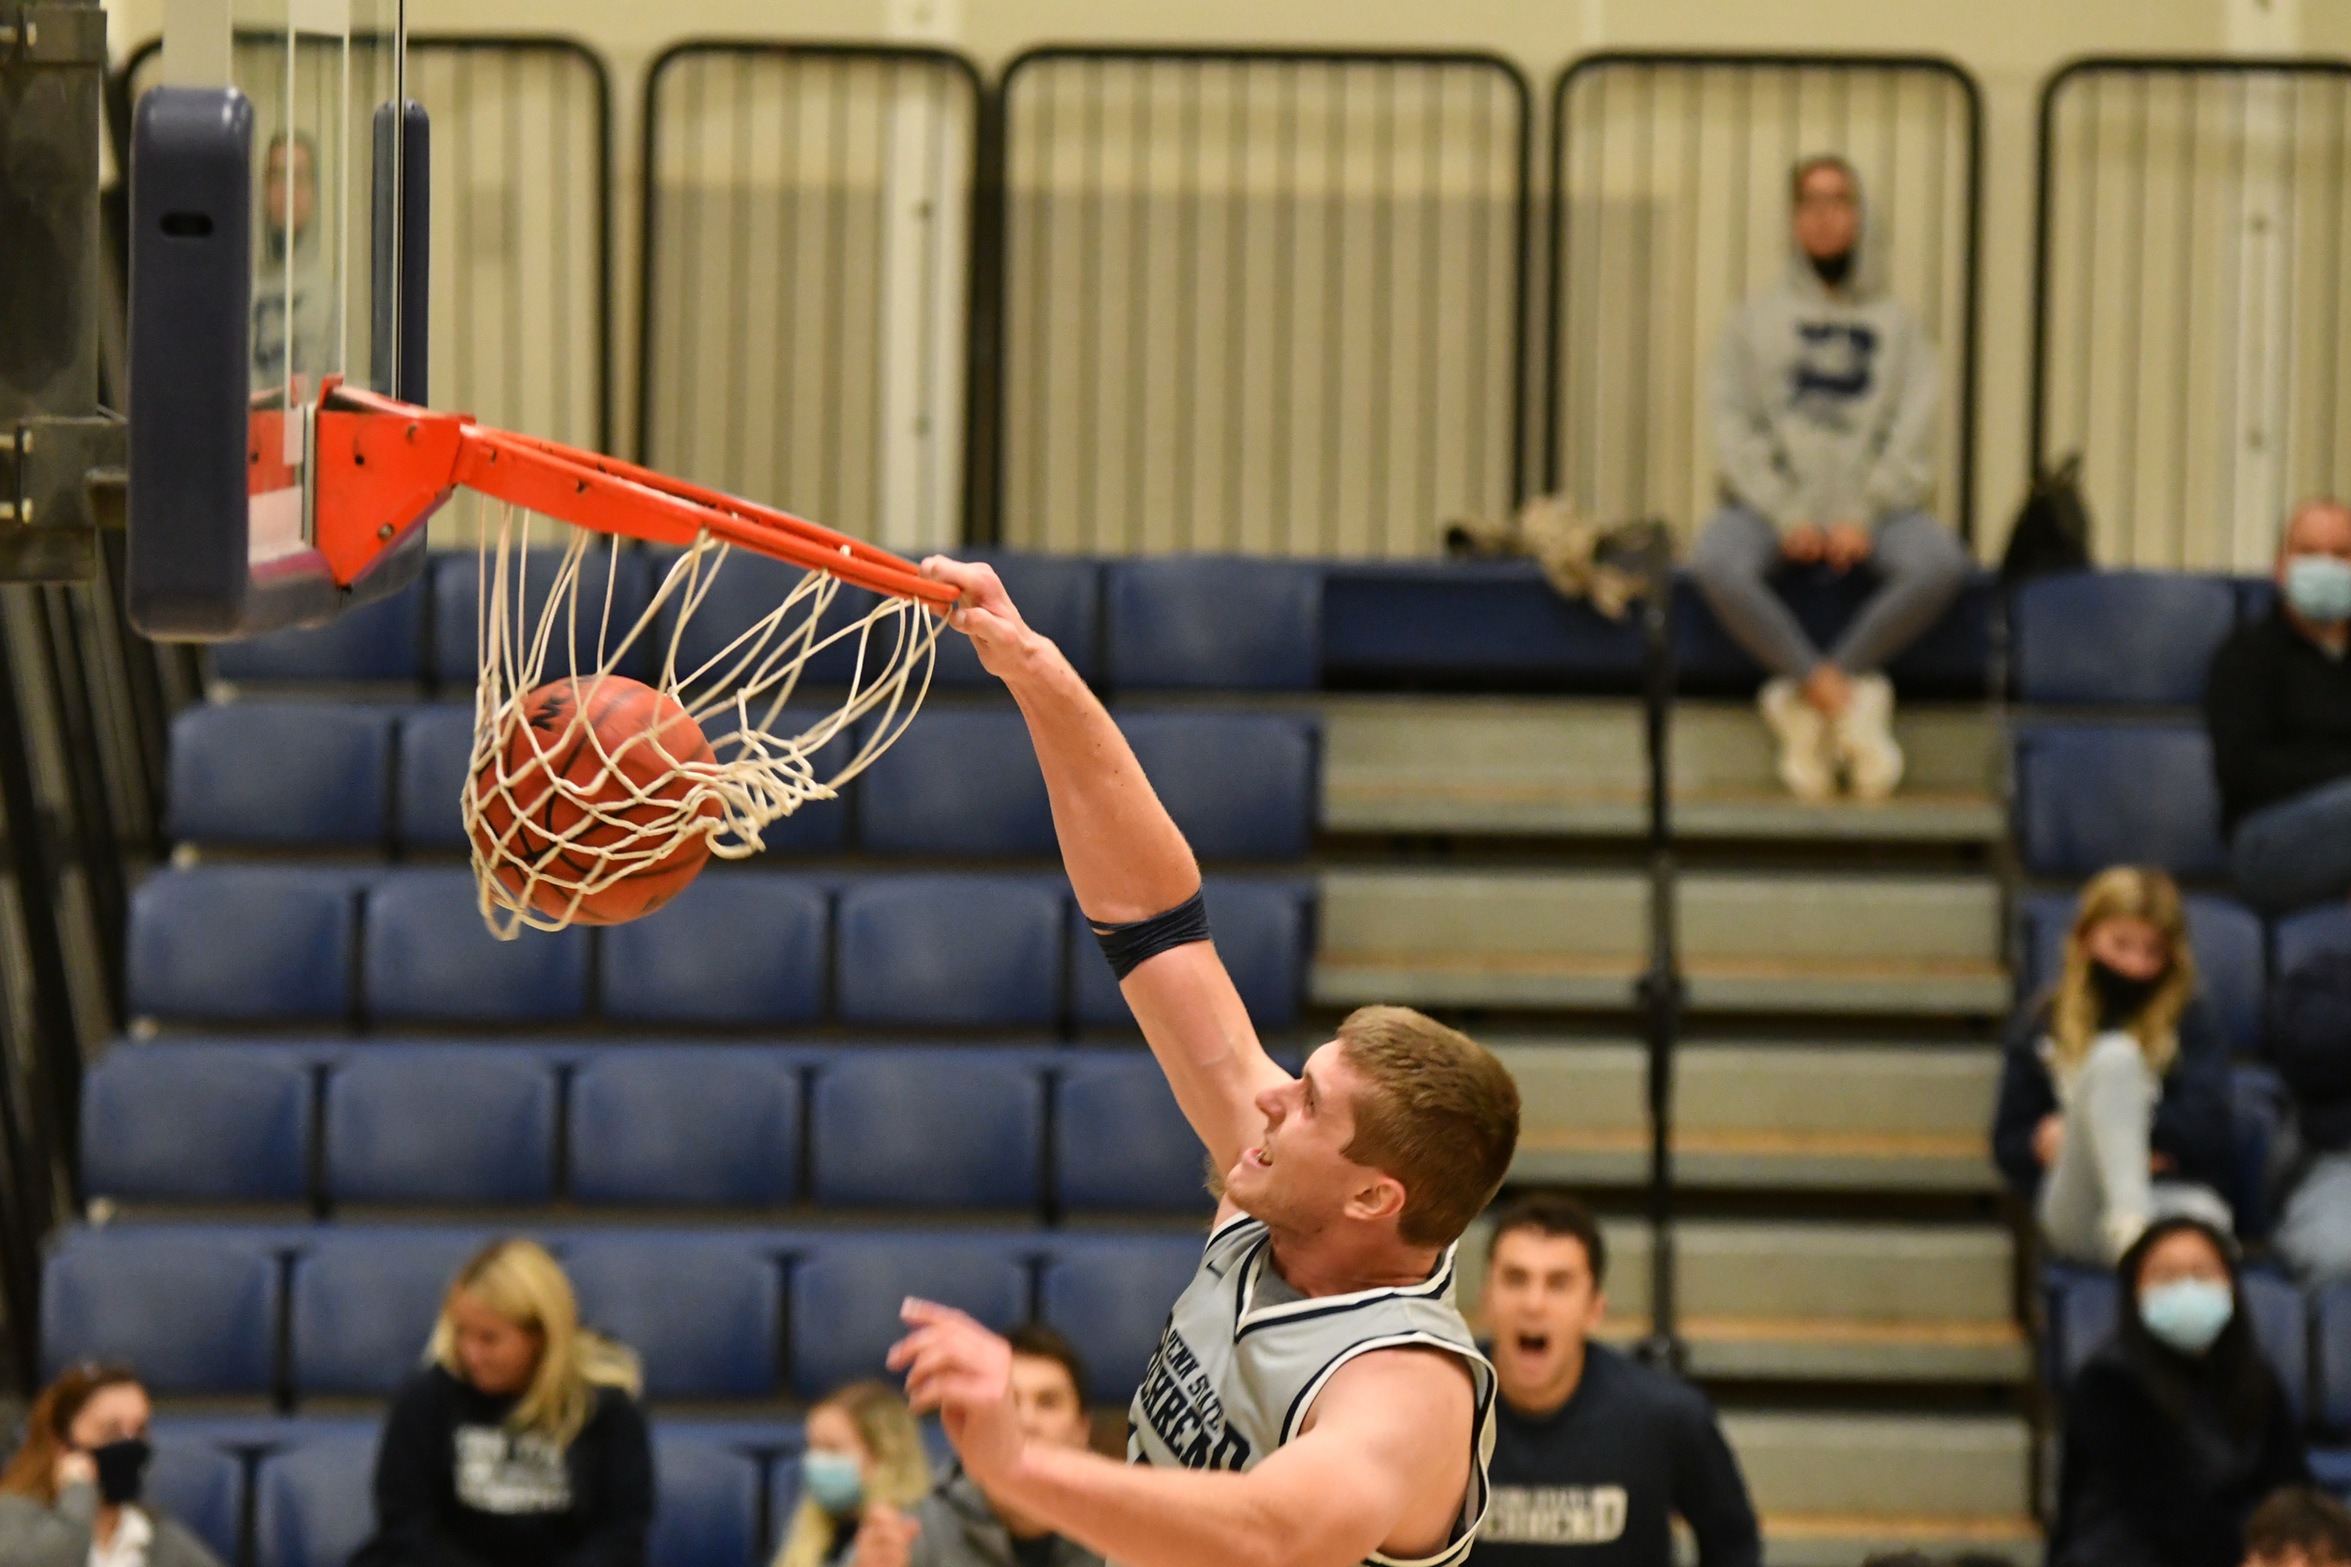 Lions Win Big on Opening Night, Gourley Leads Way With 25 Points